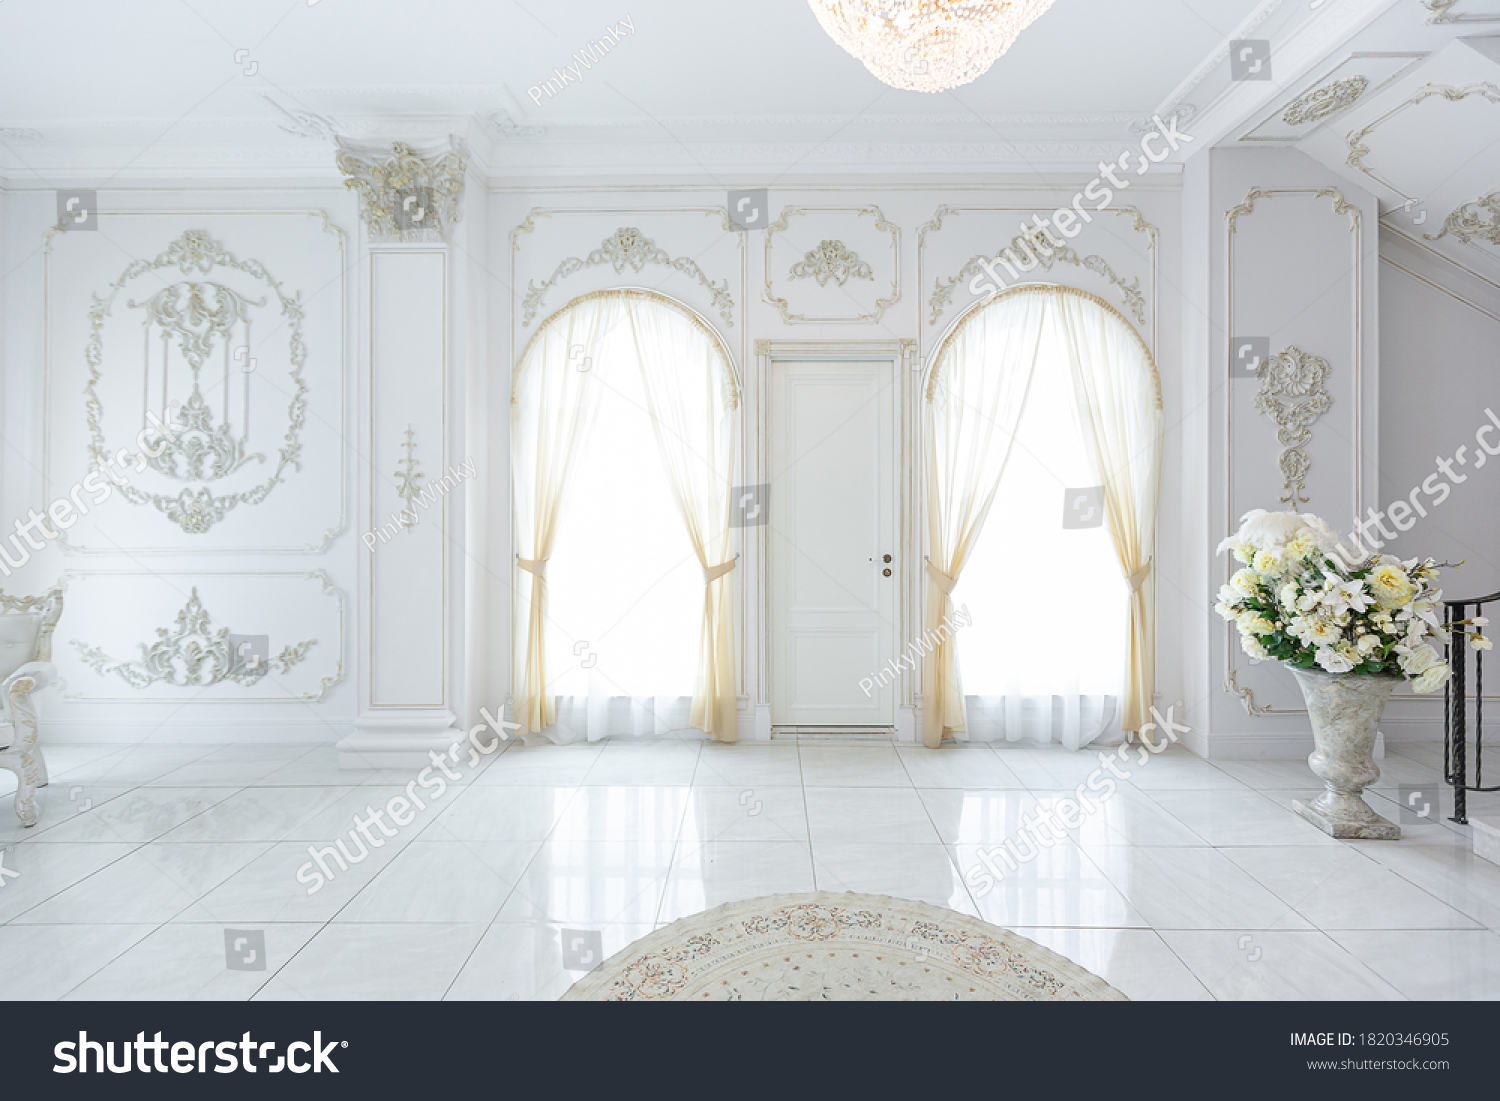 luxury royal posh interior in baroque style. very bright, light and white hall with expensive oldstyle furniture. large windows and stucco ornament decorations on the walls #1820346905